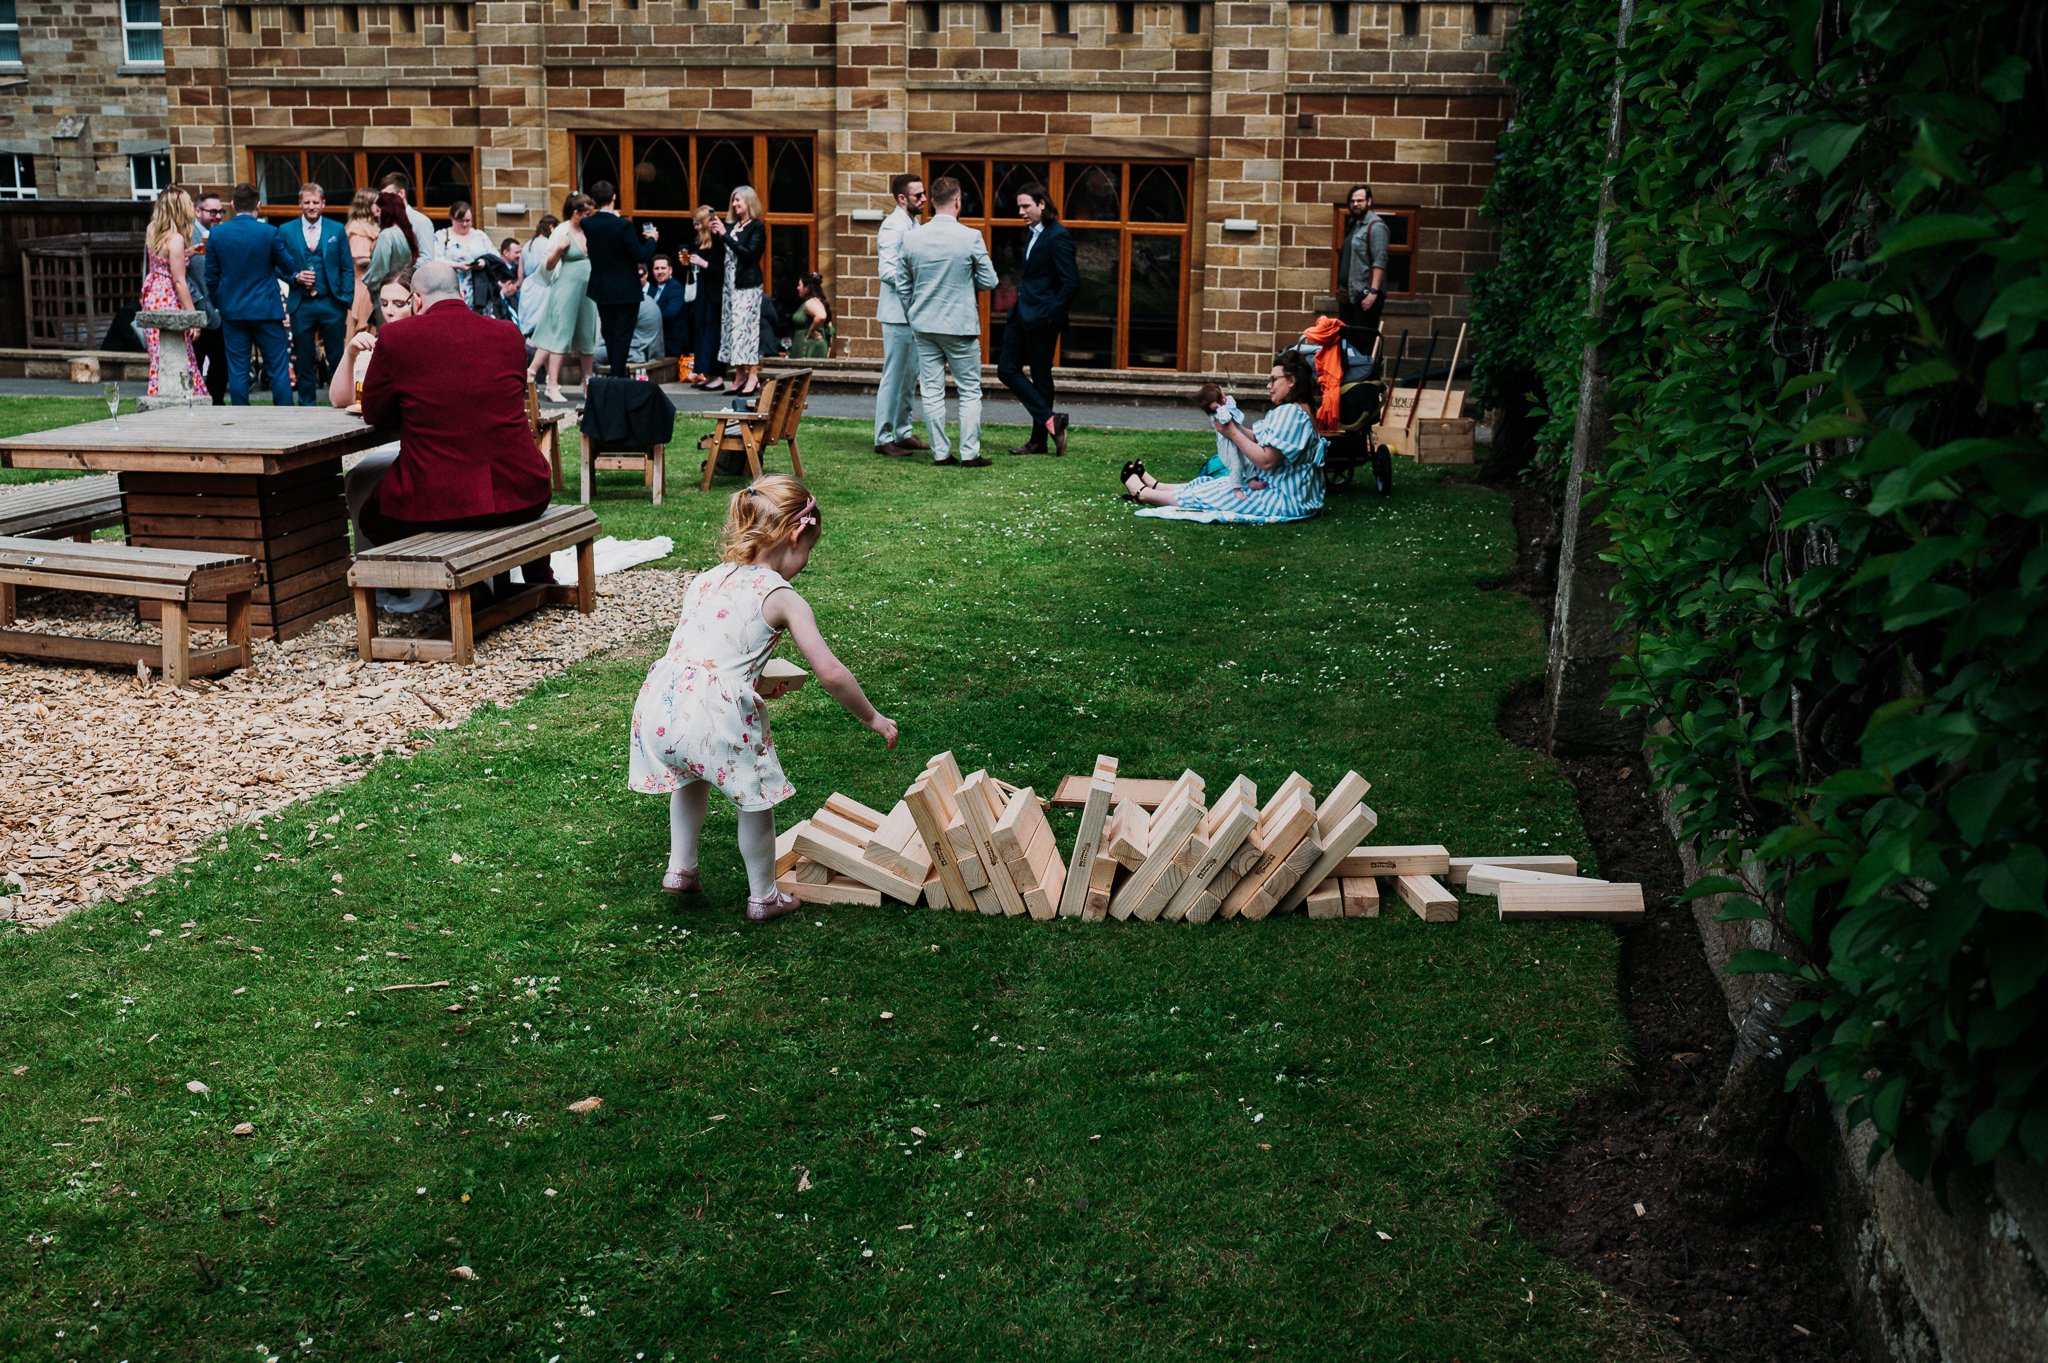 A young wedding guest knocks over the giant jenga set during the wedding at Sneaton Castle, North Yorkshire.